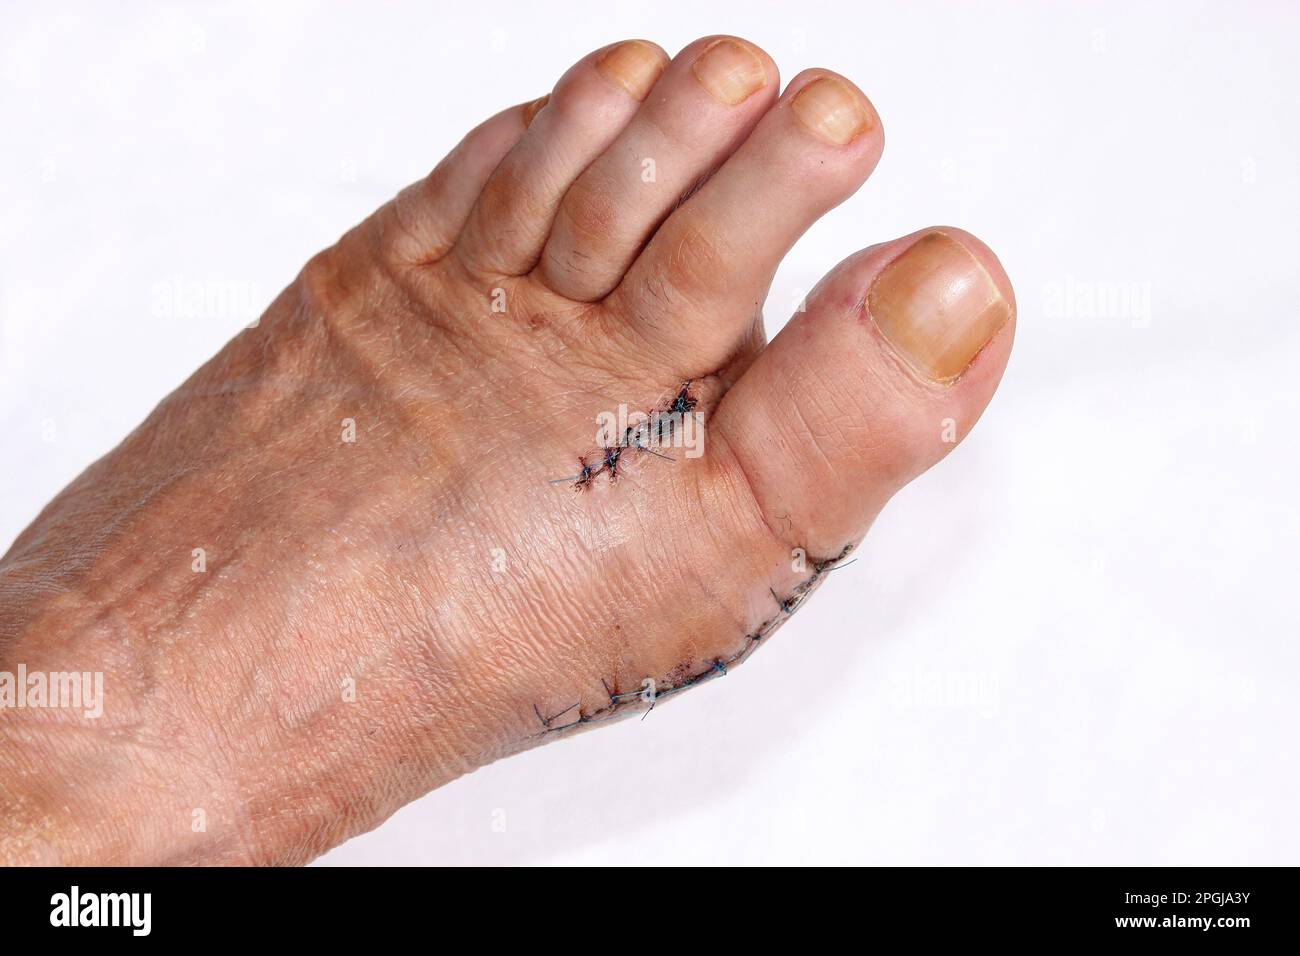 Hallux valgus, foot after surgery Stock Photo